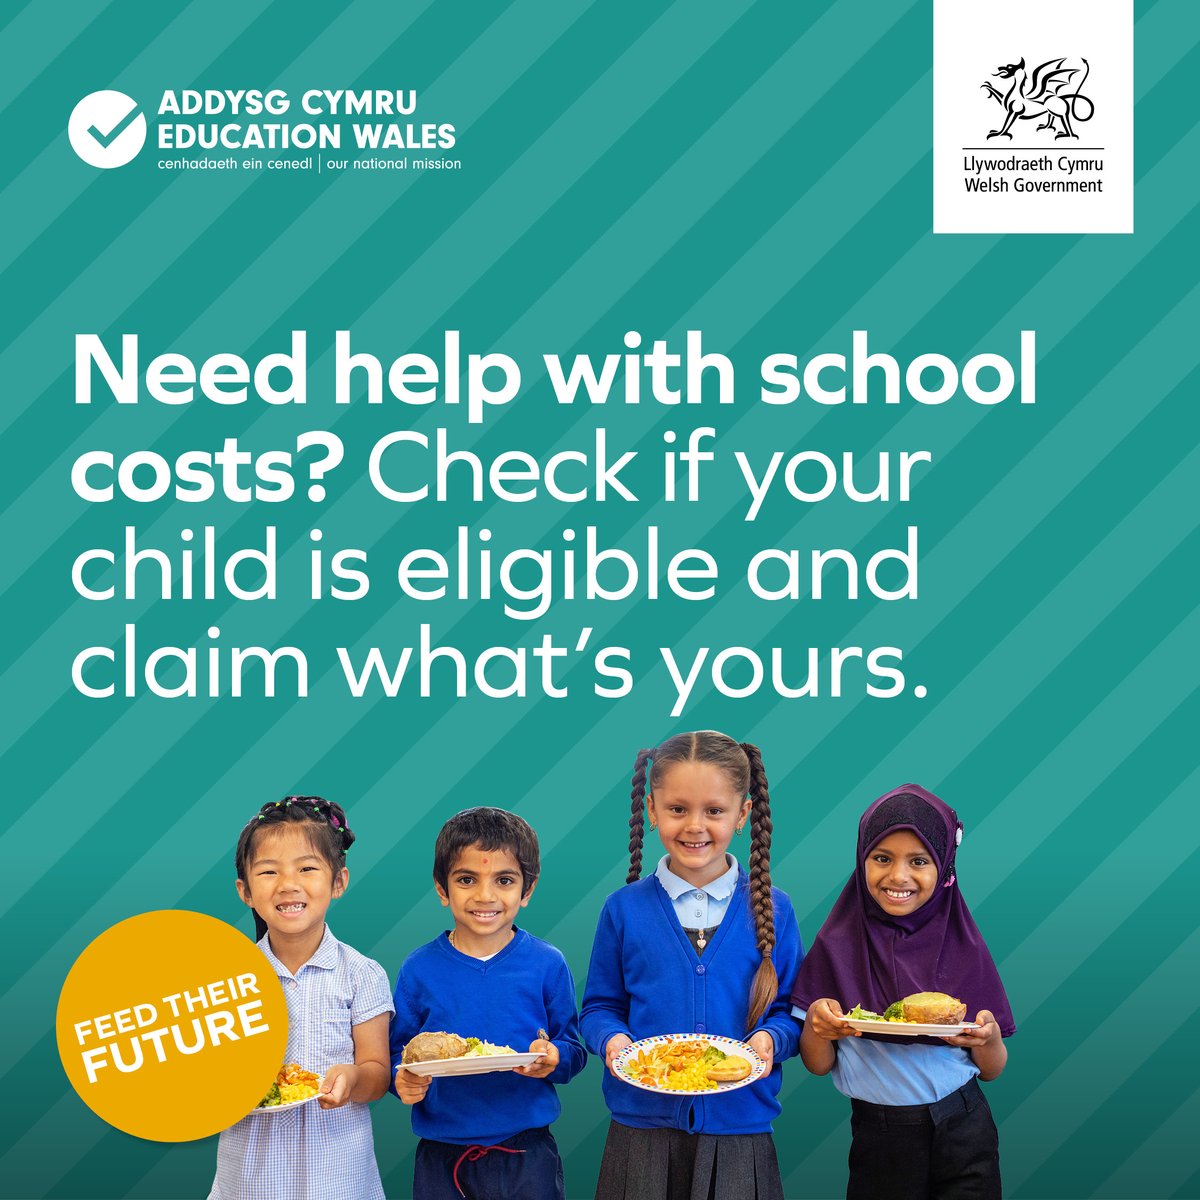 Are you worrying about schools costs?

You might be able to get help with the costs of uniform and other school essentials for your child.

We can help 👇
gov.wales/get-help-schoo… 

#FeedTheirFuture